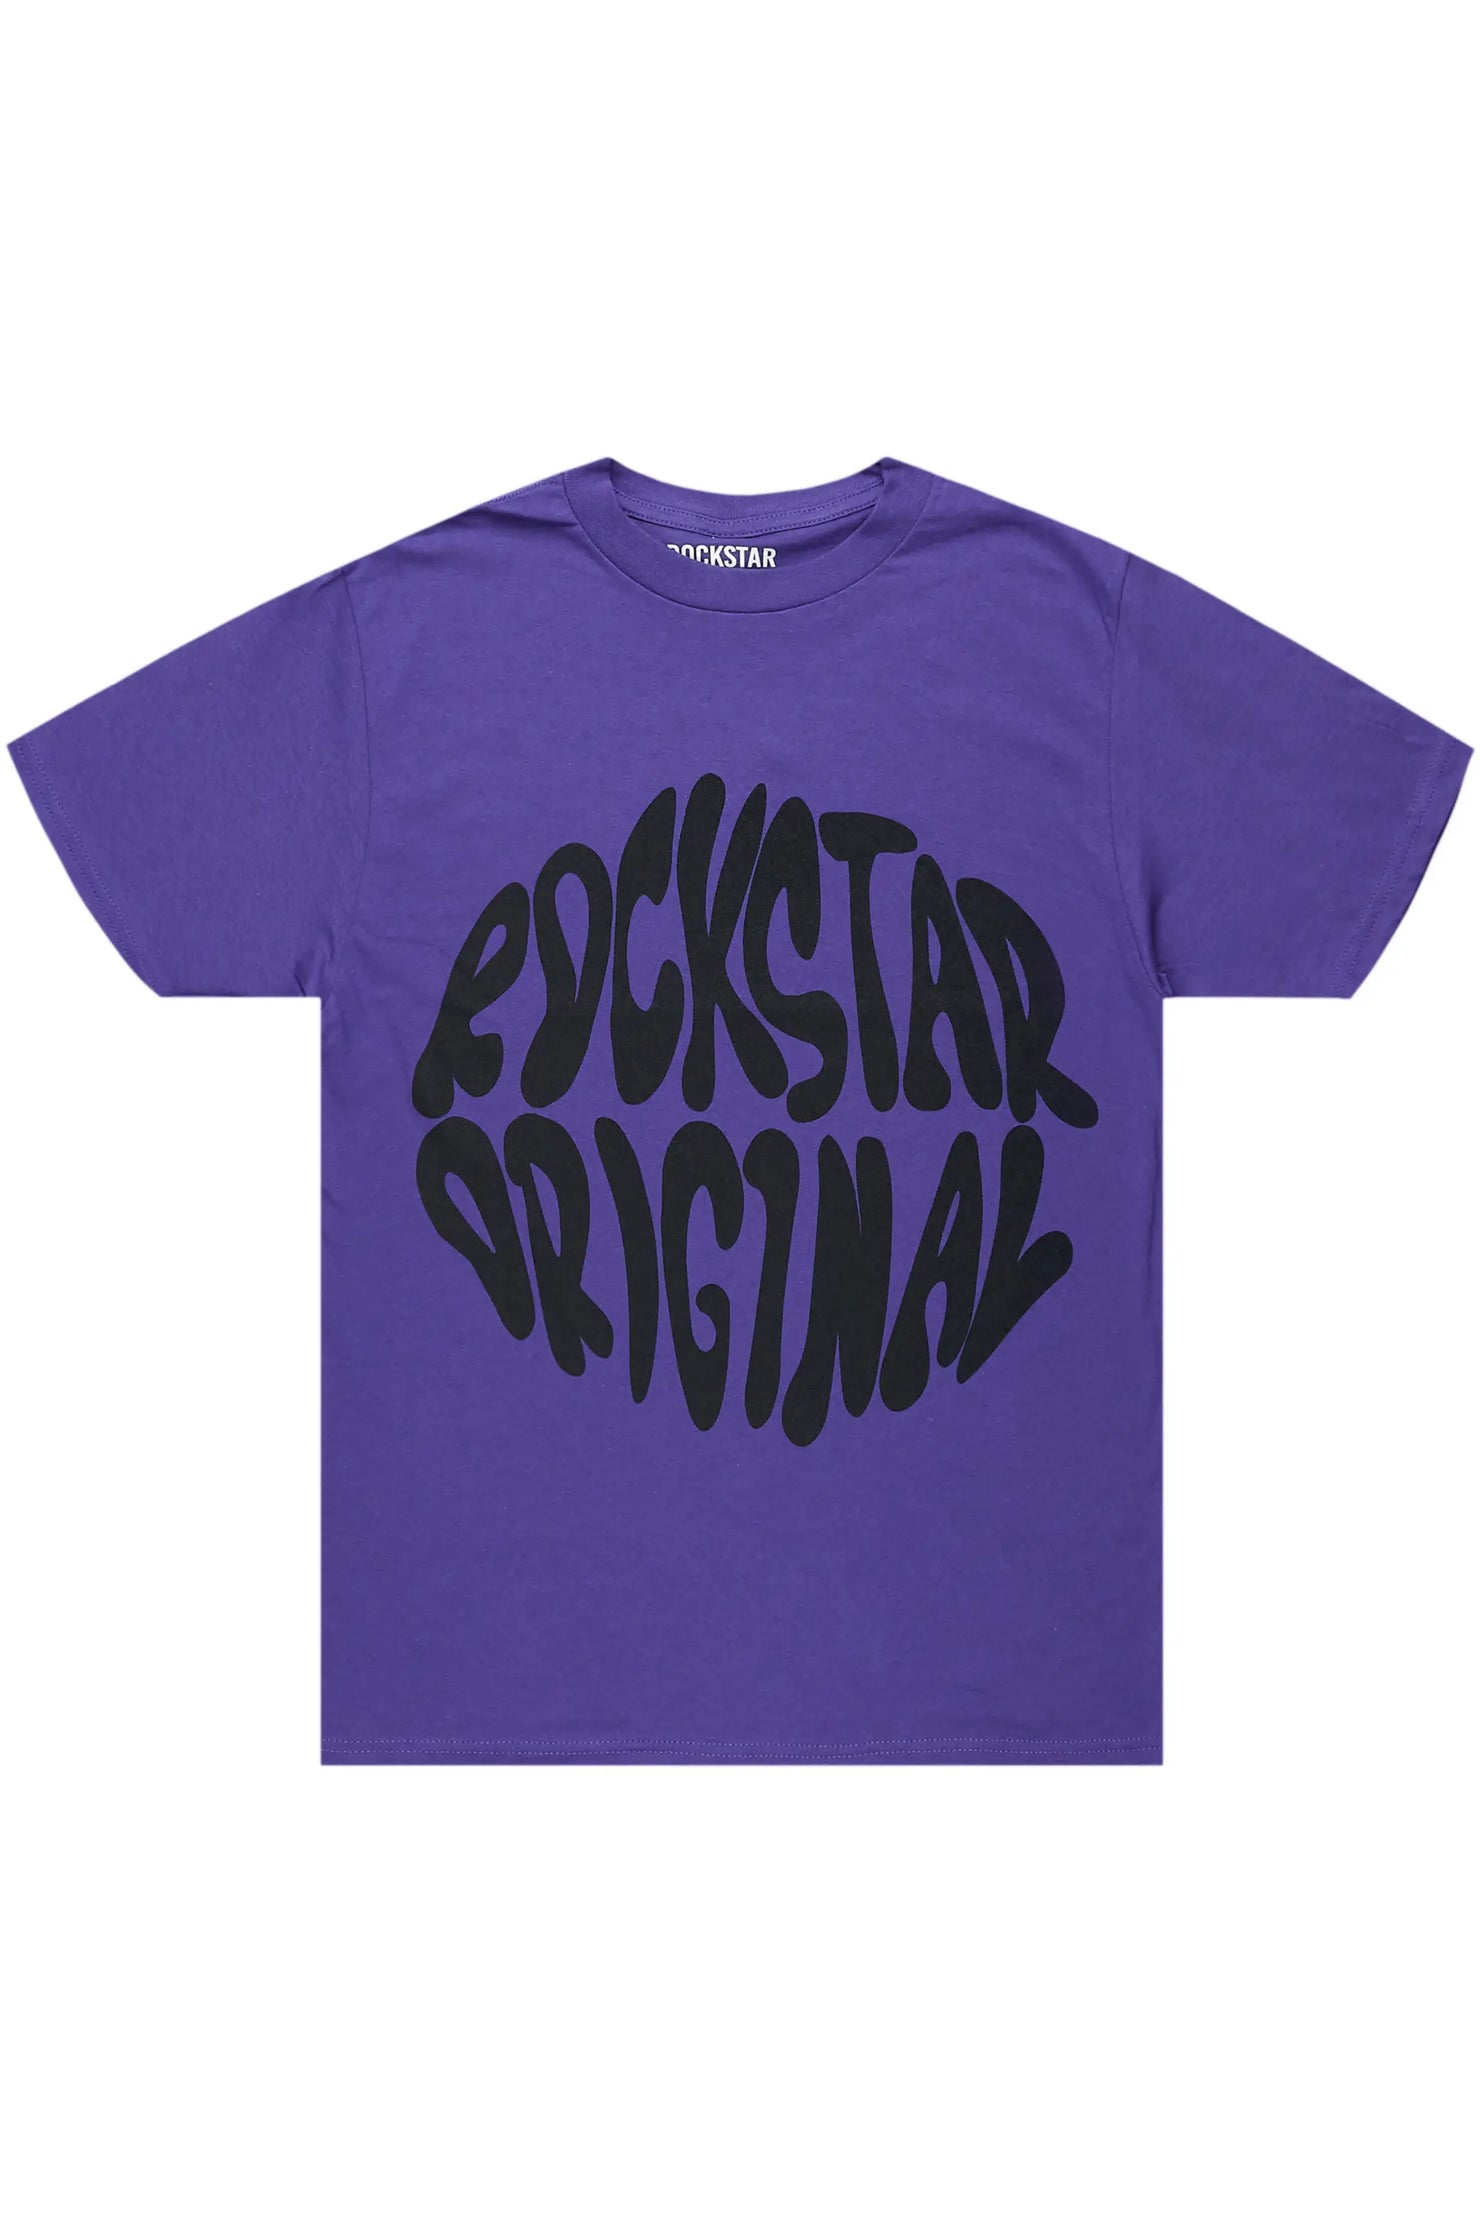 Thierry Purple Graphic T-Shirt